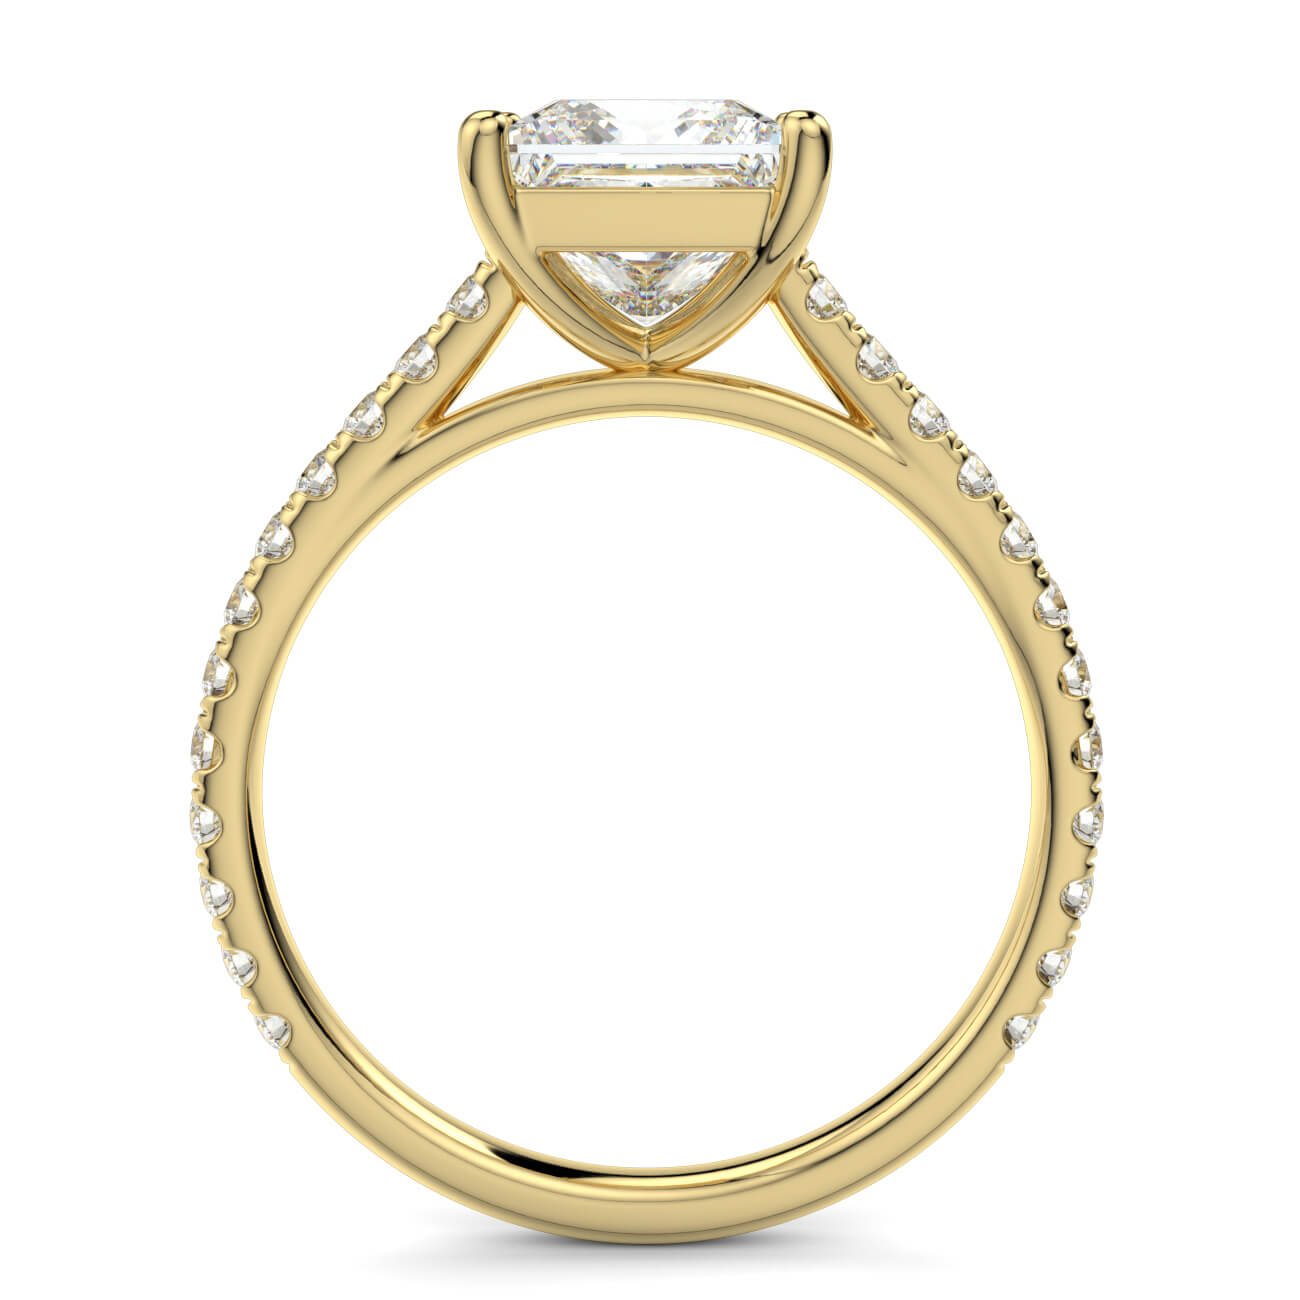 Princess Cut diamond cathedral engagement ring in yellow gold – Australian Diamond Network